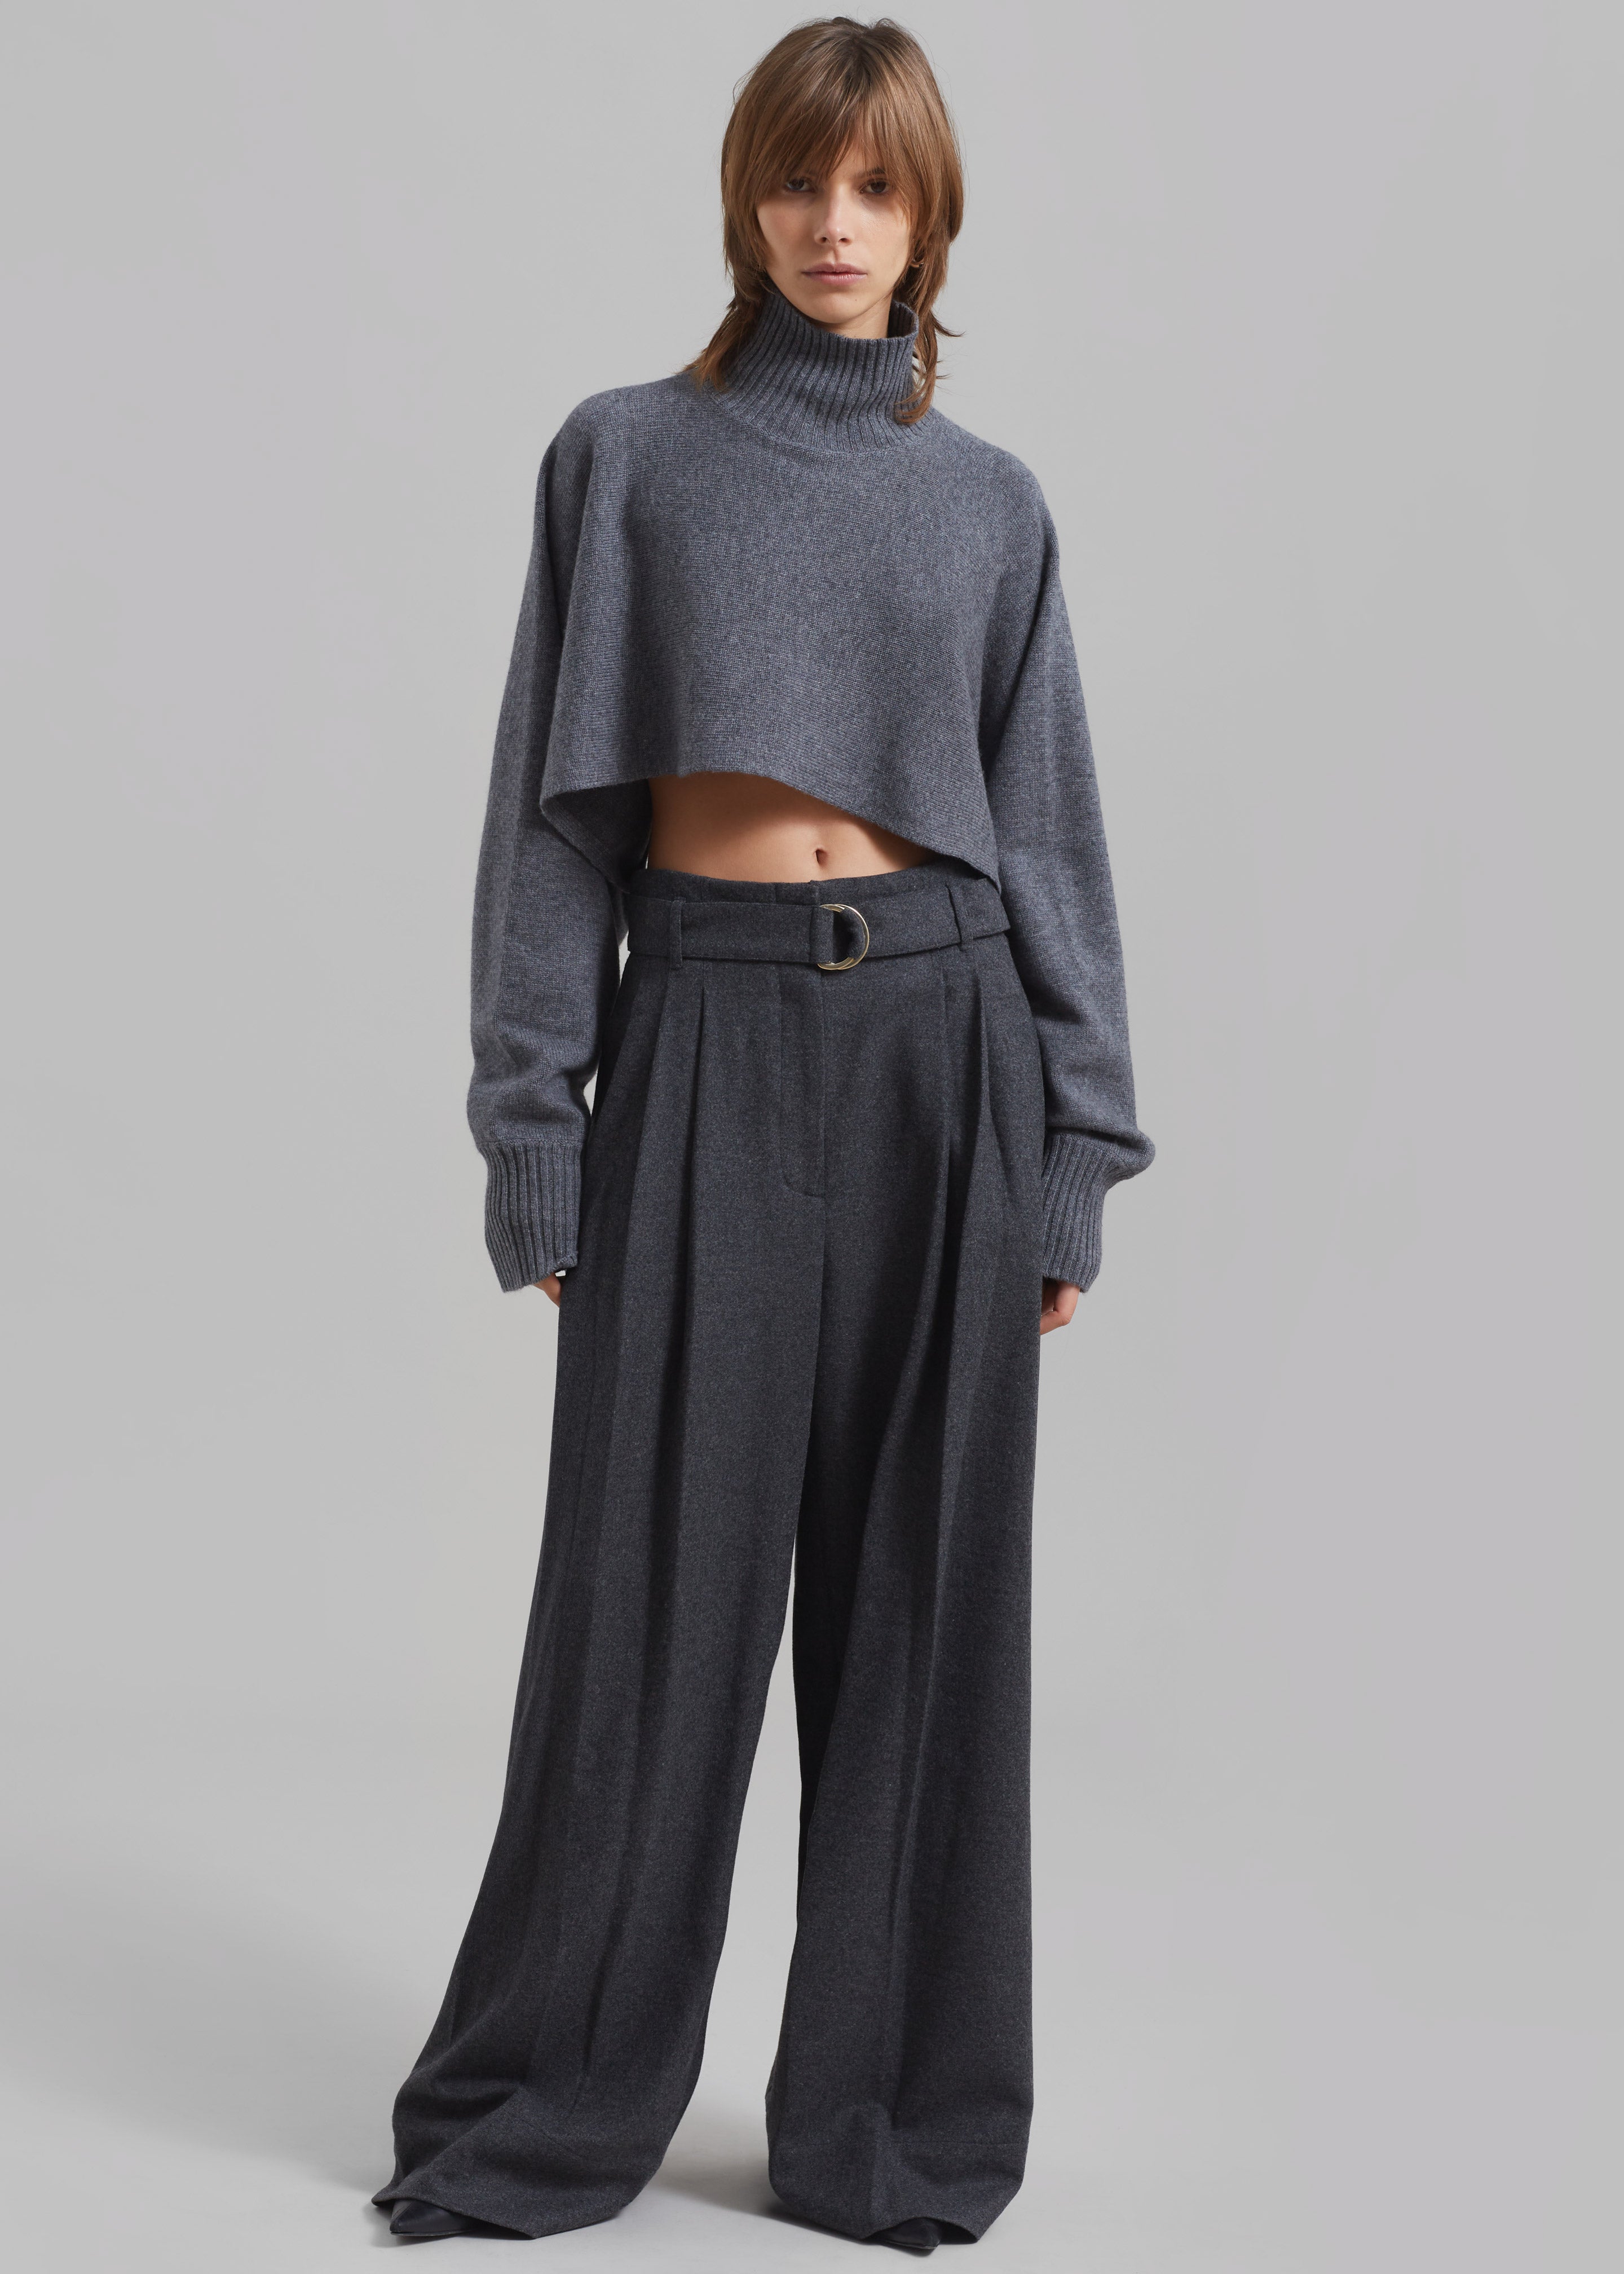 3.1 Phillip Lim Flannel Oversized Pleated Belted Pants - Charcoal - 1